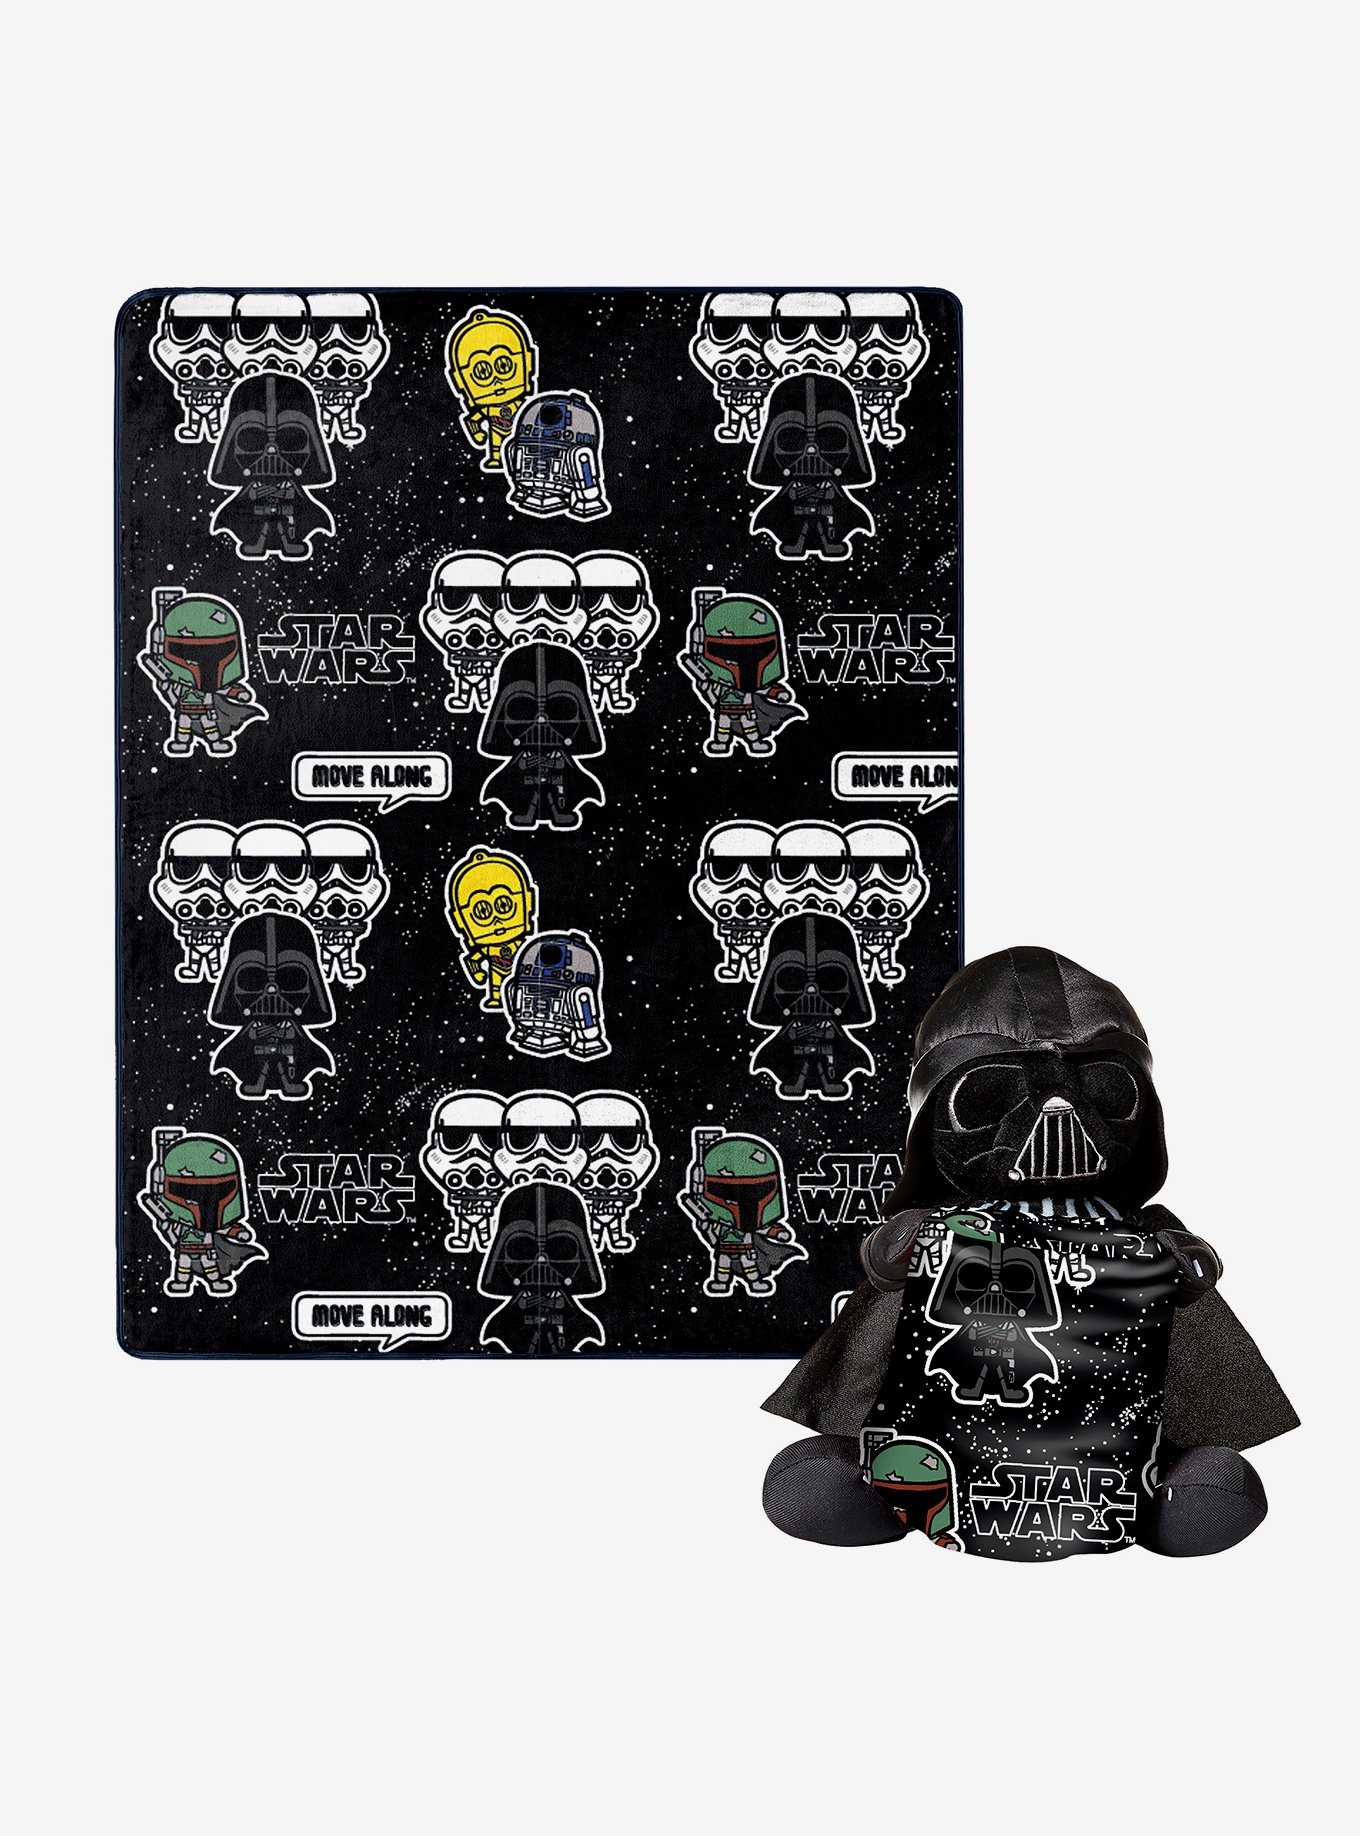 Star Wars Classic Space Vader Hugger Pillow and Throw Set, , hi-res